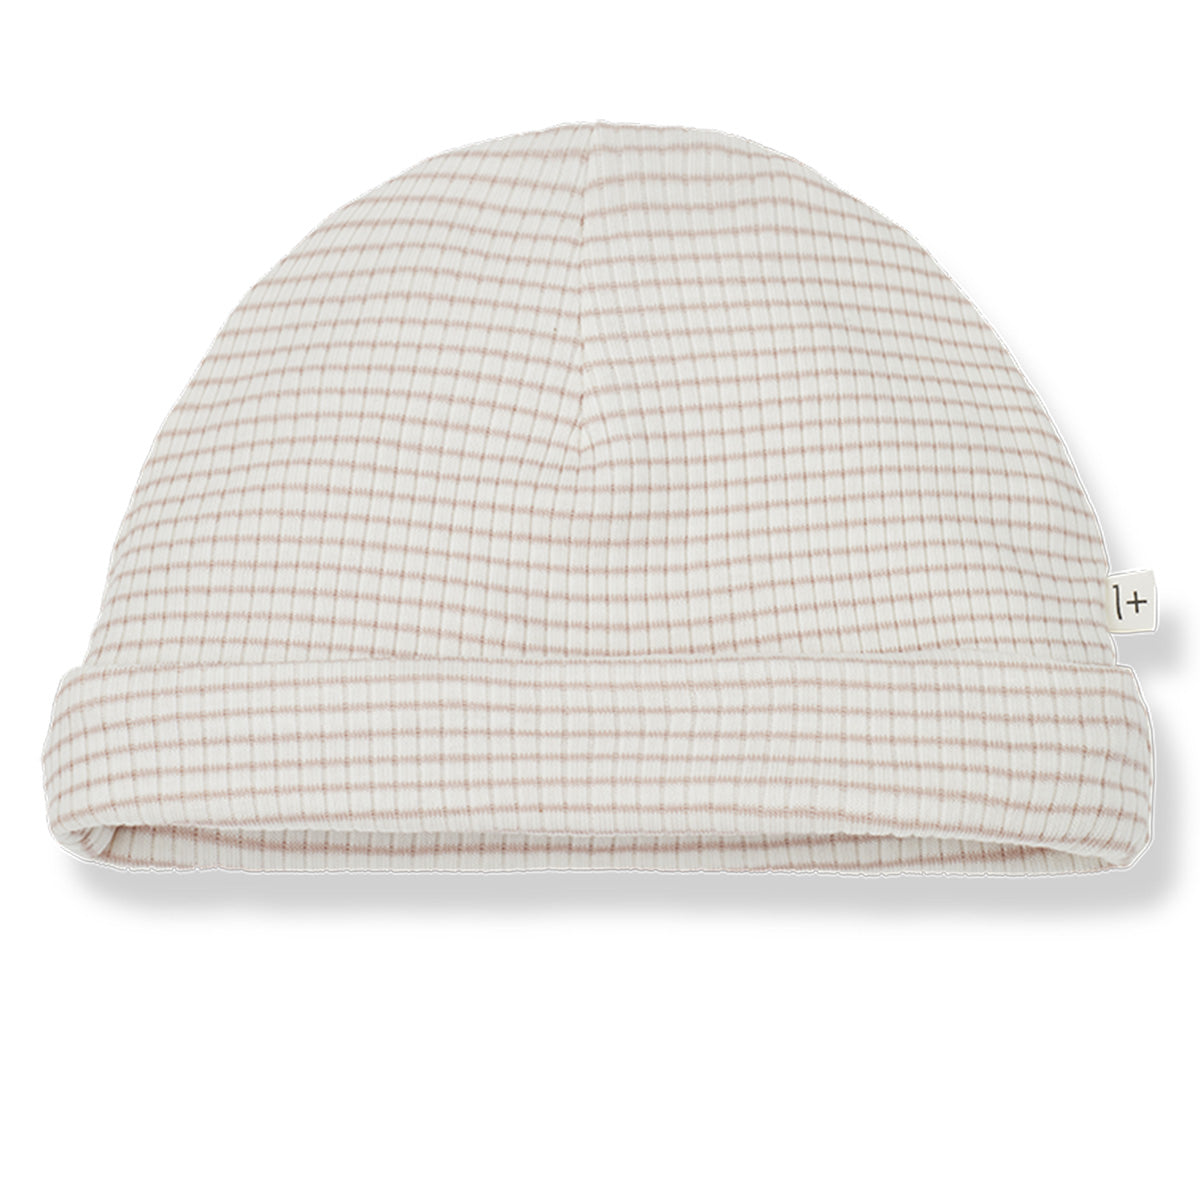 The Gio Beanie from 1 + in the Family. The hat has a striped all-over print